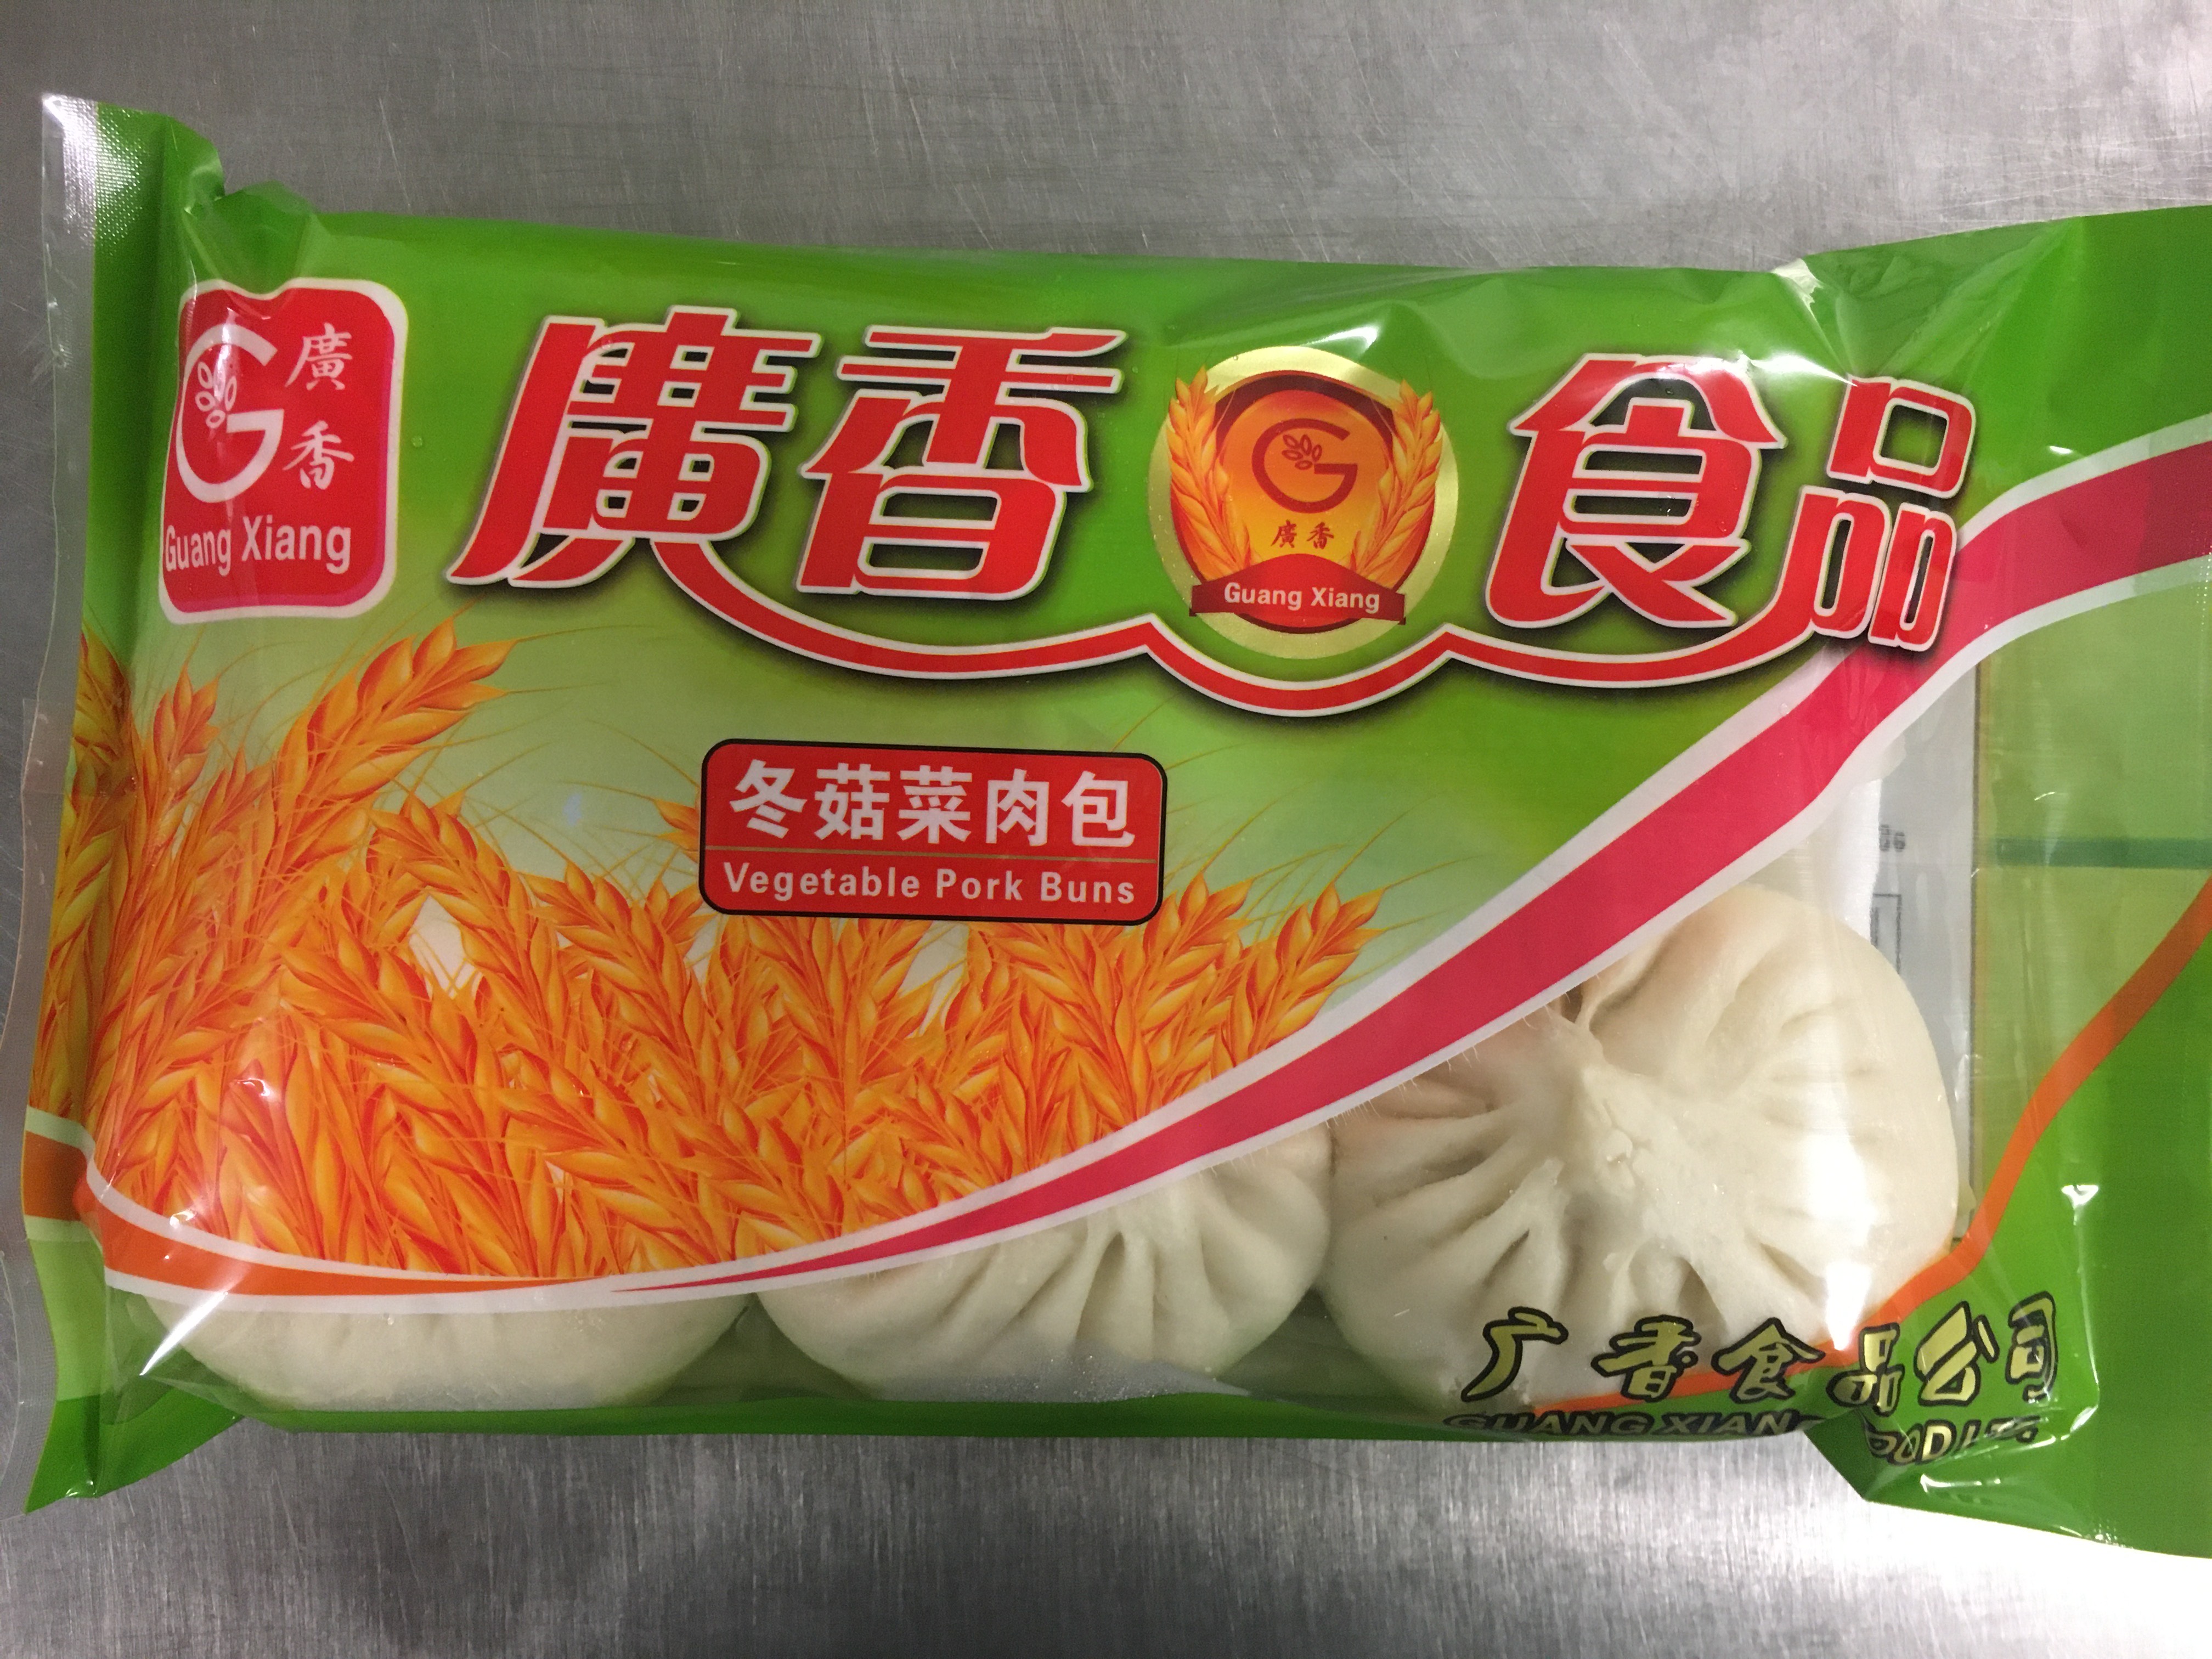 Image of Guangxiang brand Vegetable Pork Buns (522g) in a plasti pack